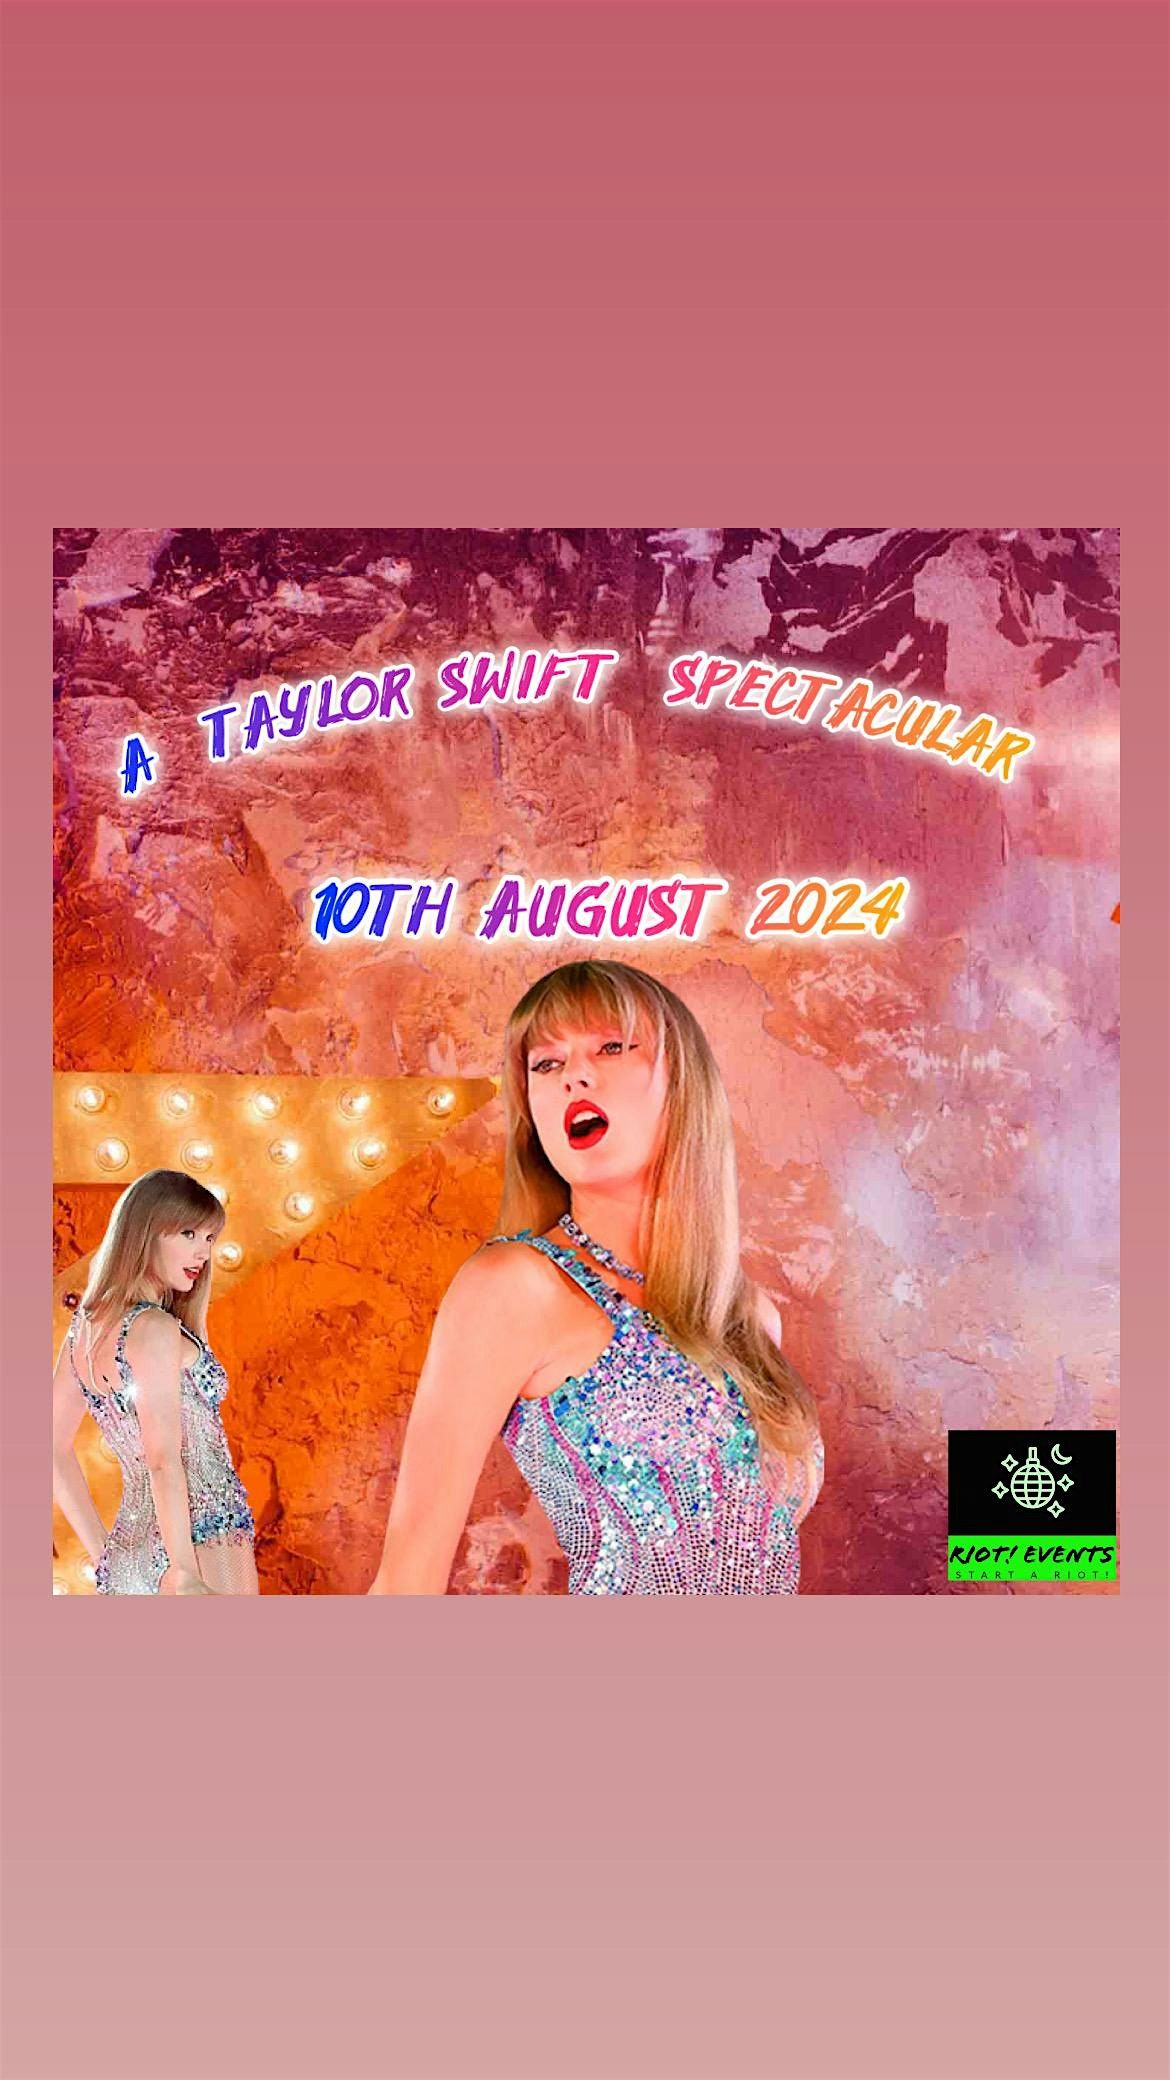 A Taylor Swift Spectacular